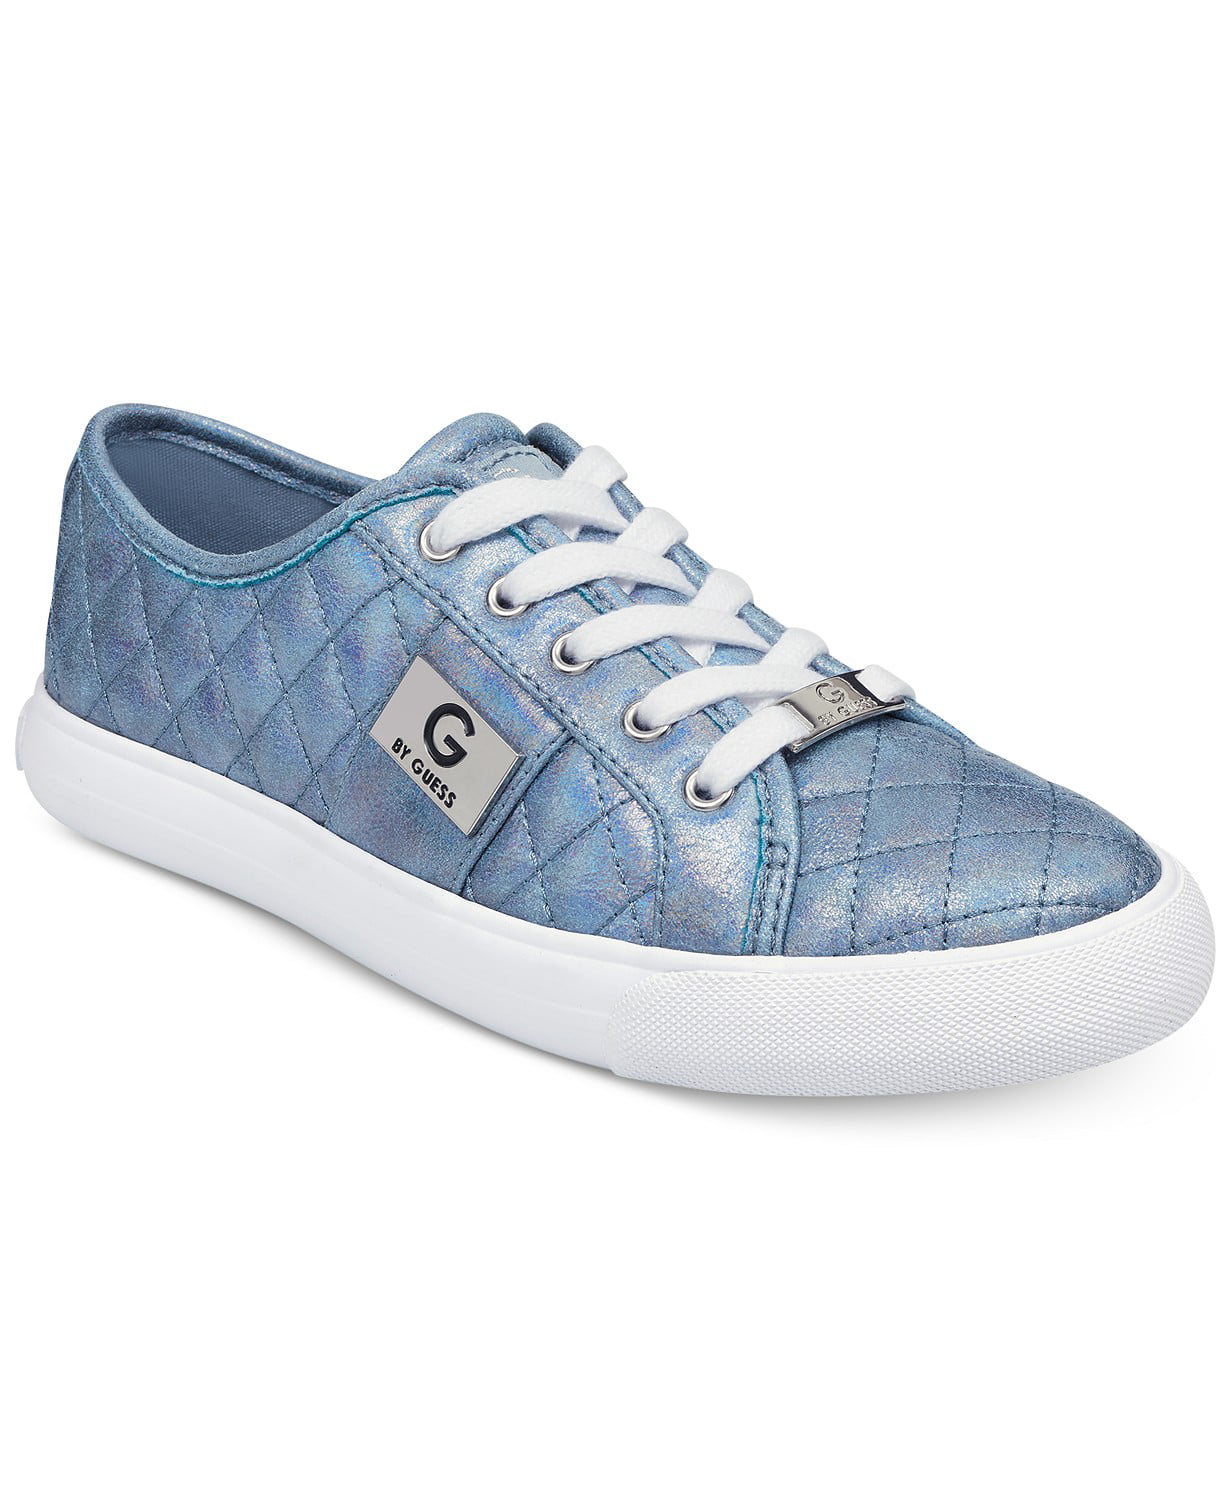 G by Guess Women's Backer2 Lace Up Leather Quilted Pattern Sneakers ...